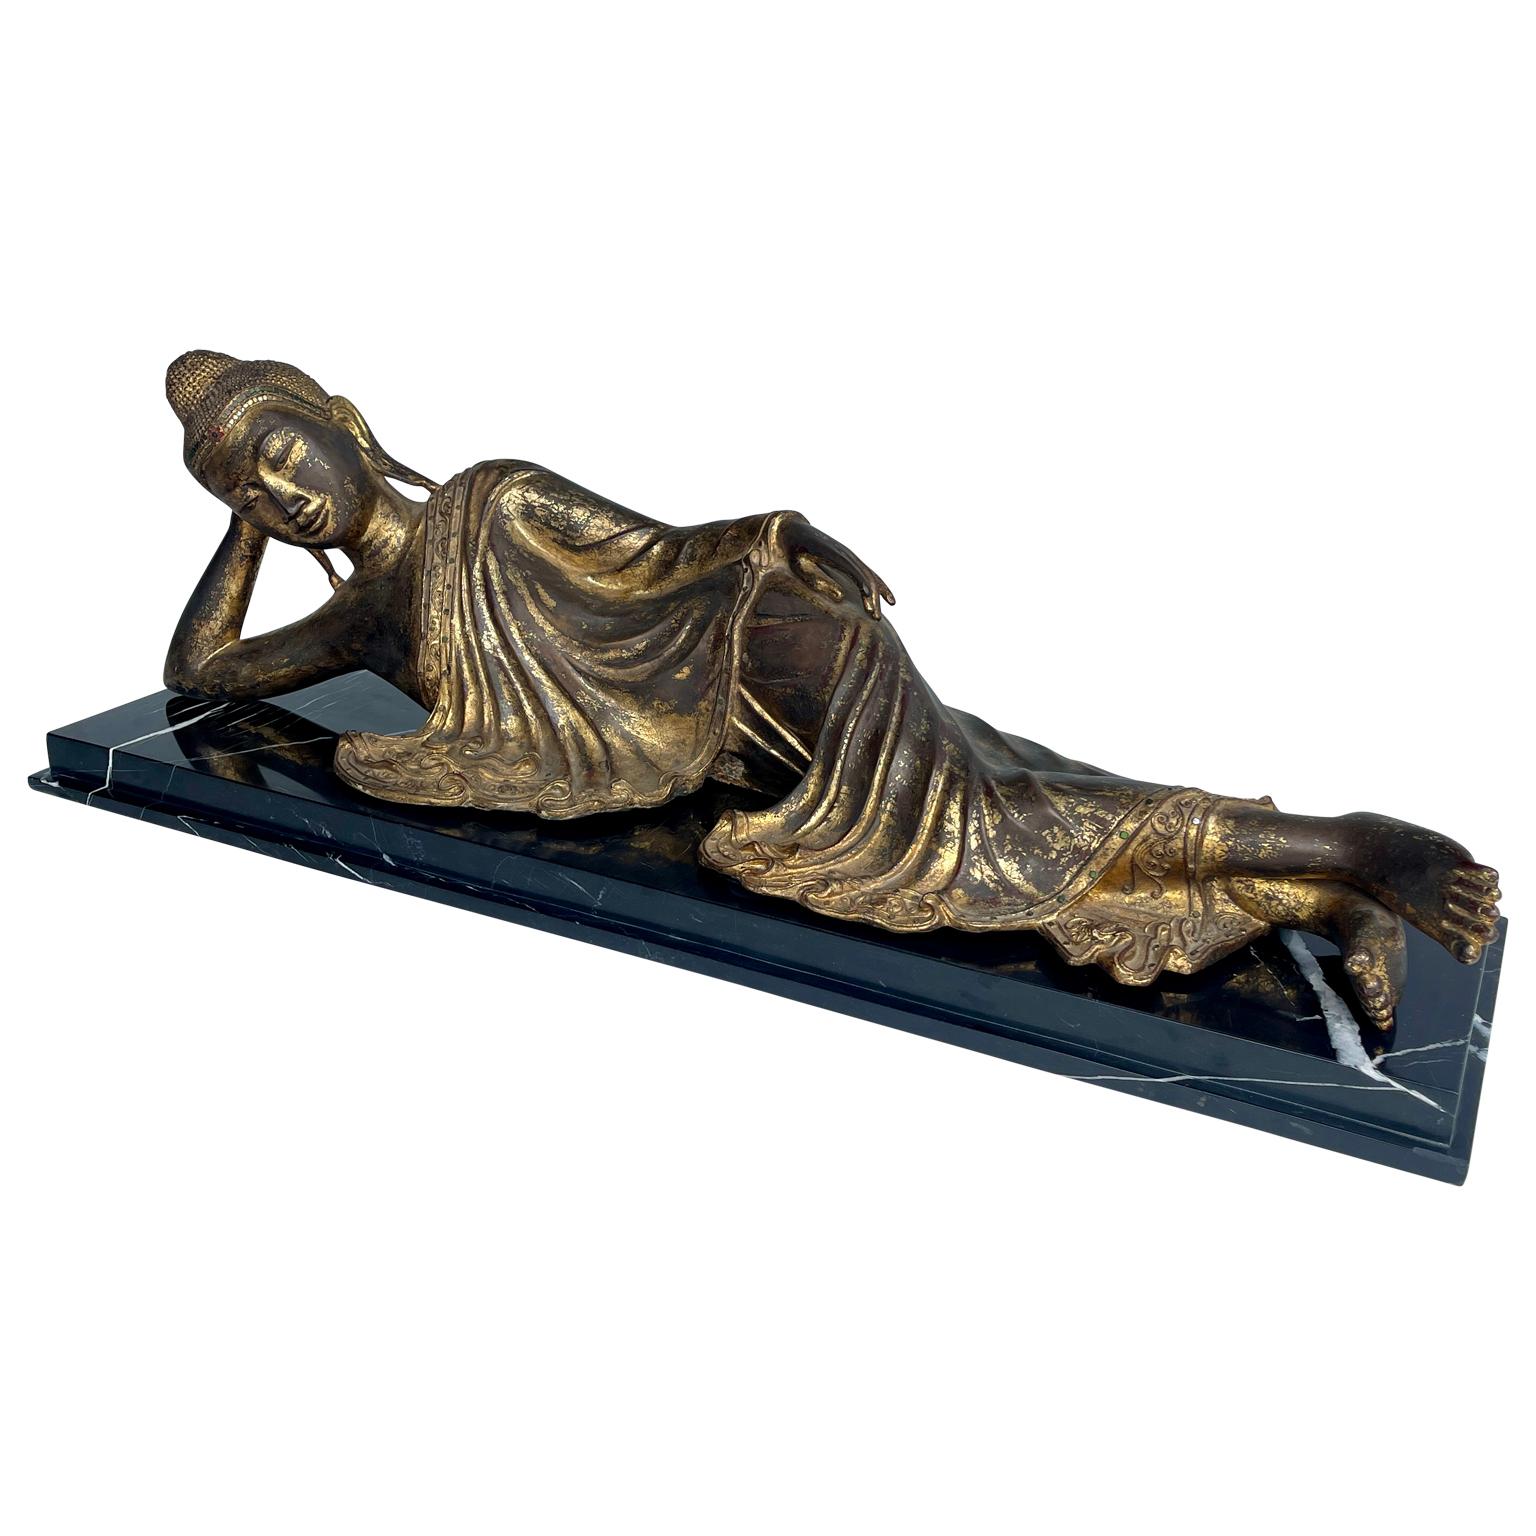 Other Large Mandalay Style Gilt Bronze Reclining Buddha Sculpture on Black Marble Base For Sale